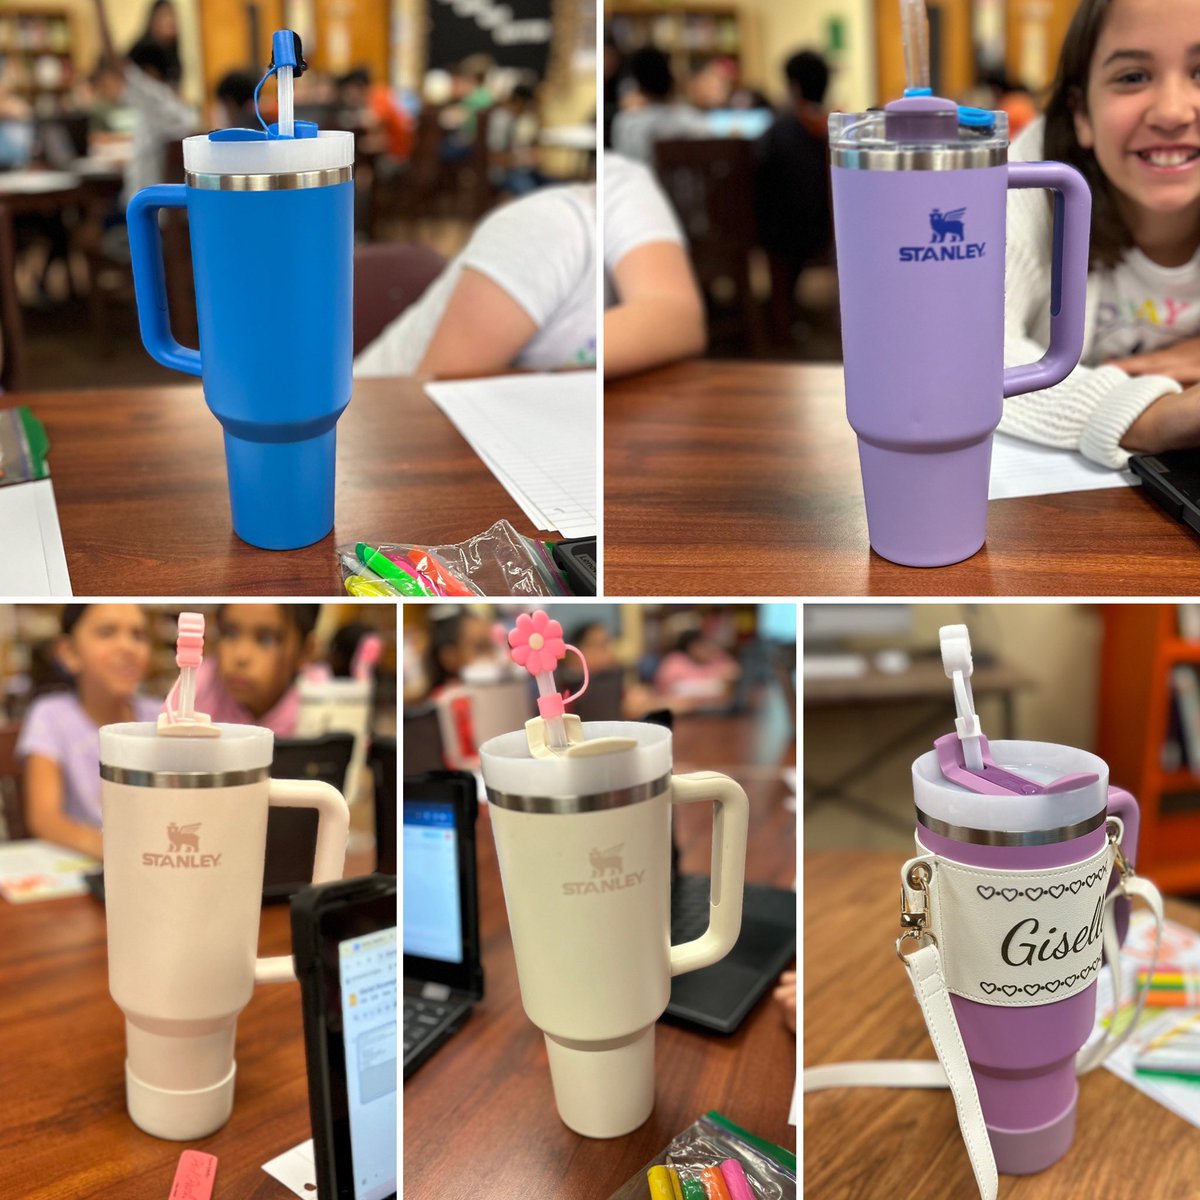 ✍️ Thank you @ALZ_Rockets for working with the rest of our 3rd grade kiddos on their ECRs this morning! They had the best time! (ALSO, my class was a little CRAY with all their @StanleyBrand cups. 🤦🏻‍♀️) @Rockets120 @McAllenISD #rocketpride